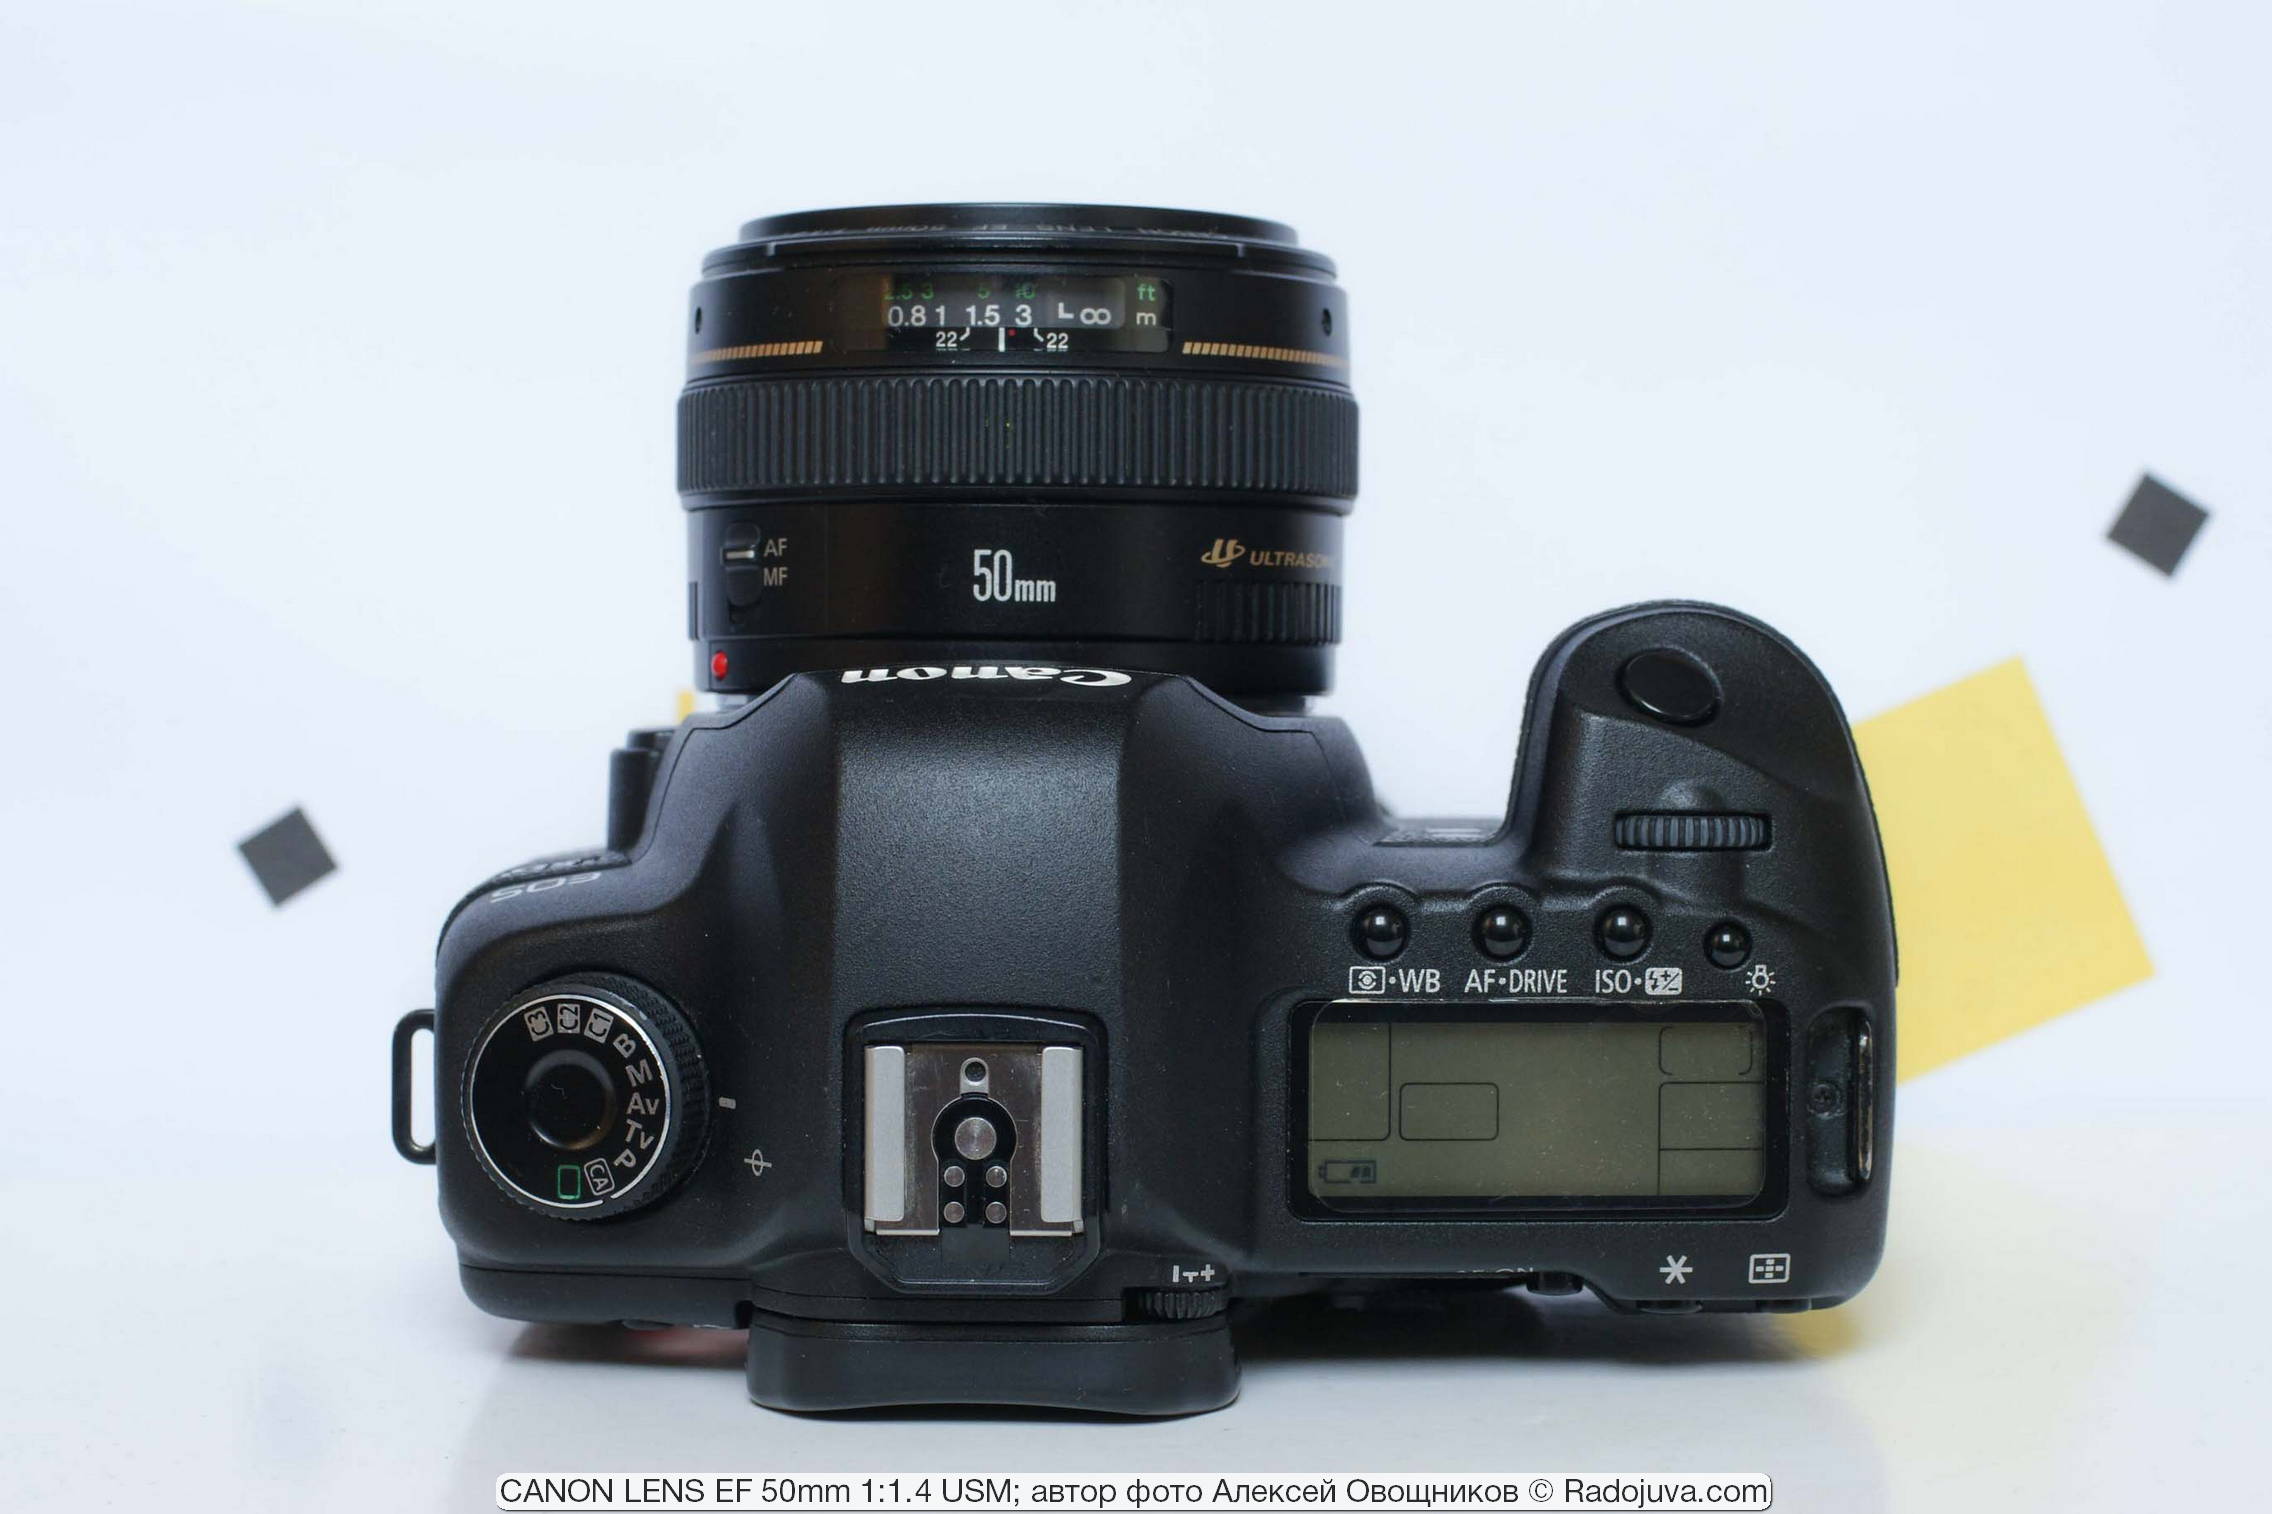 CANON LENS EF 50mm 1: 1.4 USM. Review from the reader Radozhiva